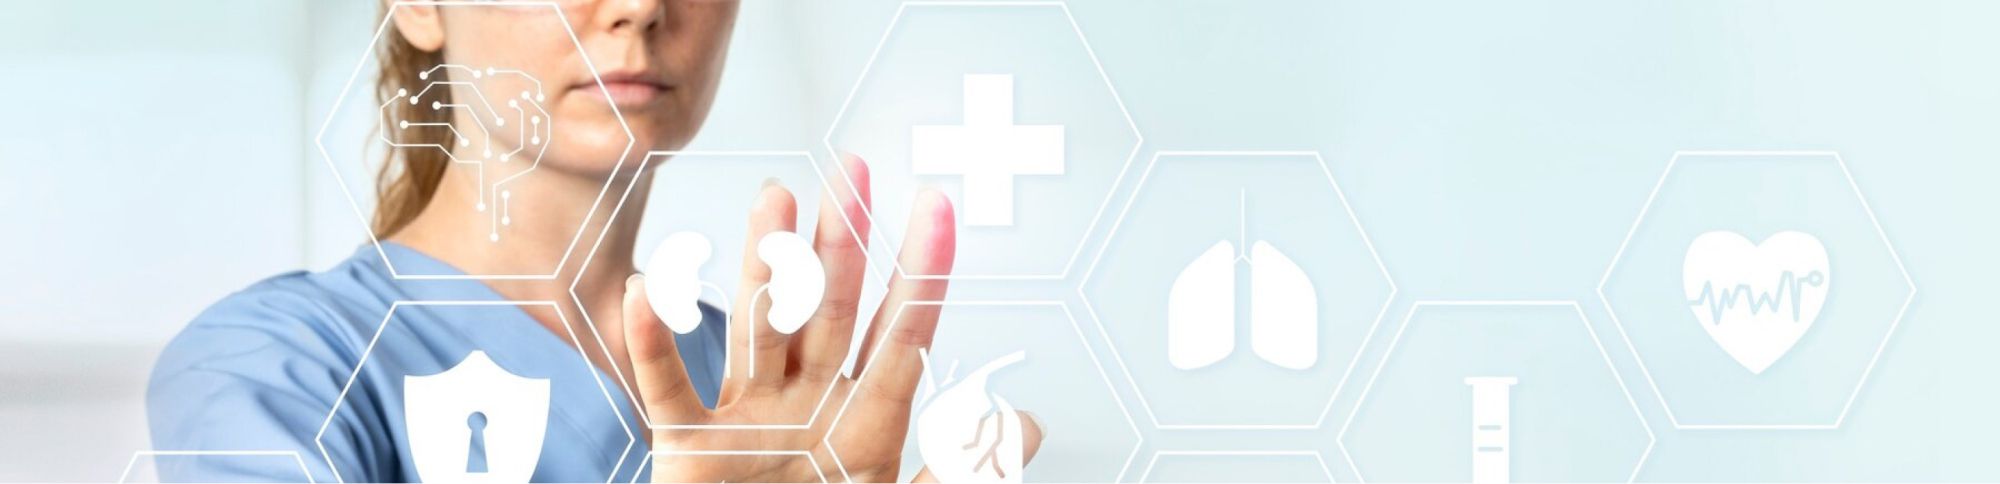 overcoming challenges in healthcare data integration ystems